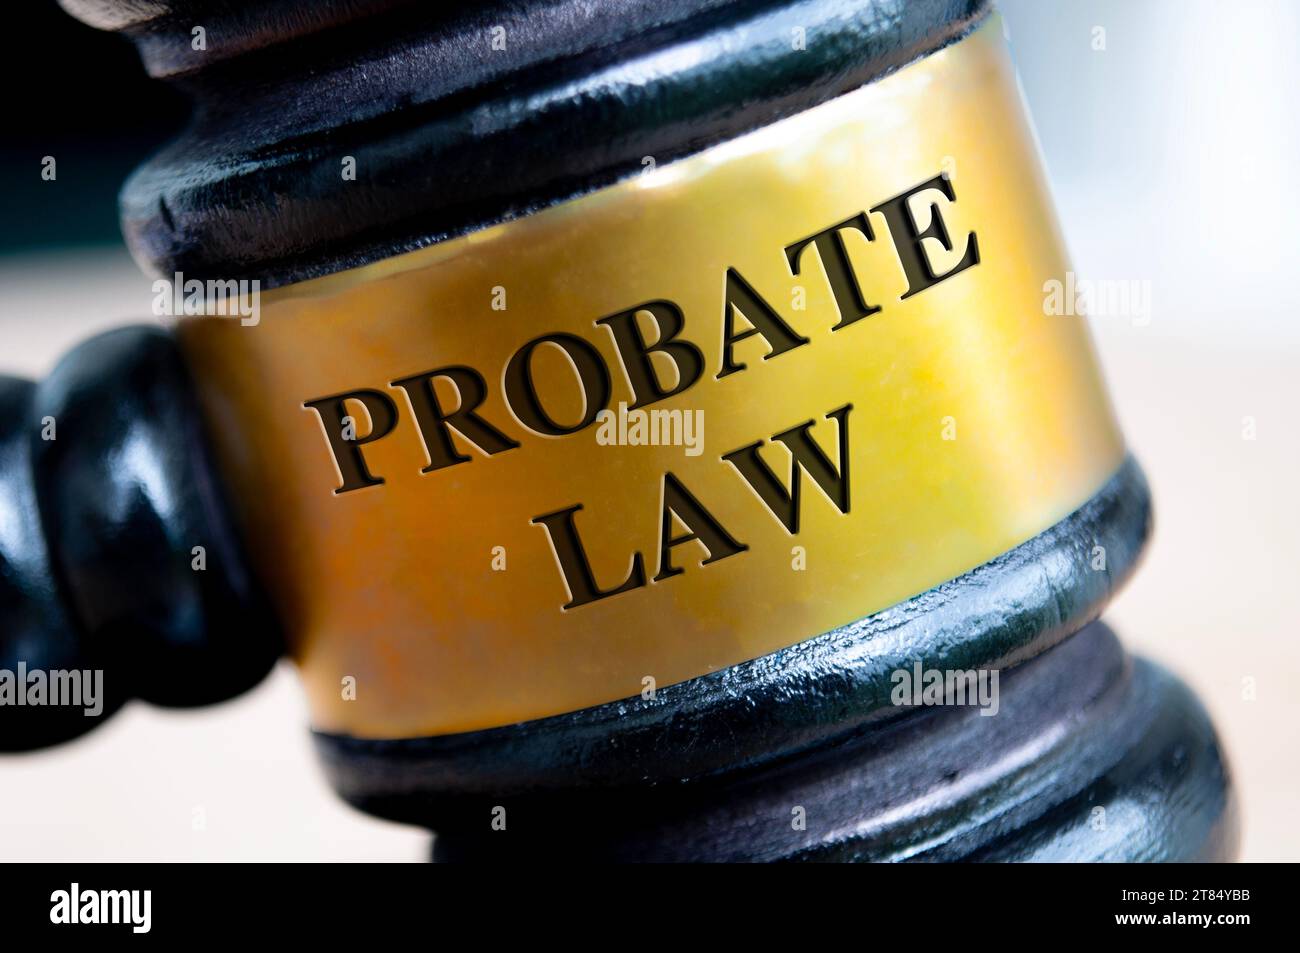 Probate law text engraved on gavel. Probate Law and Legal concept Stock Photo